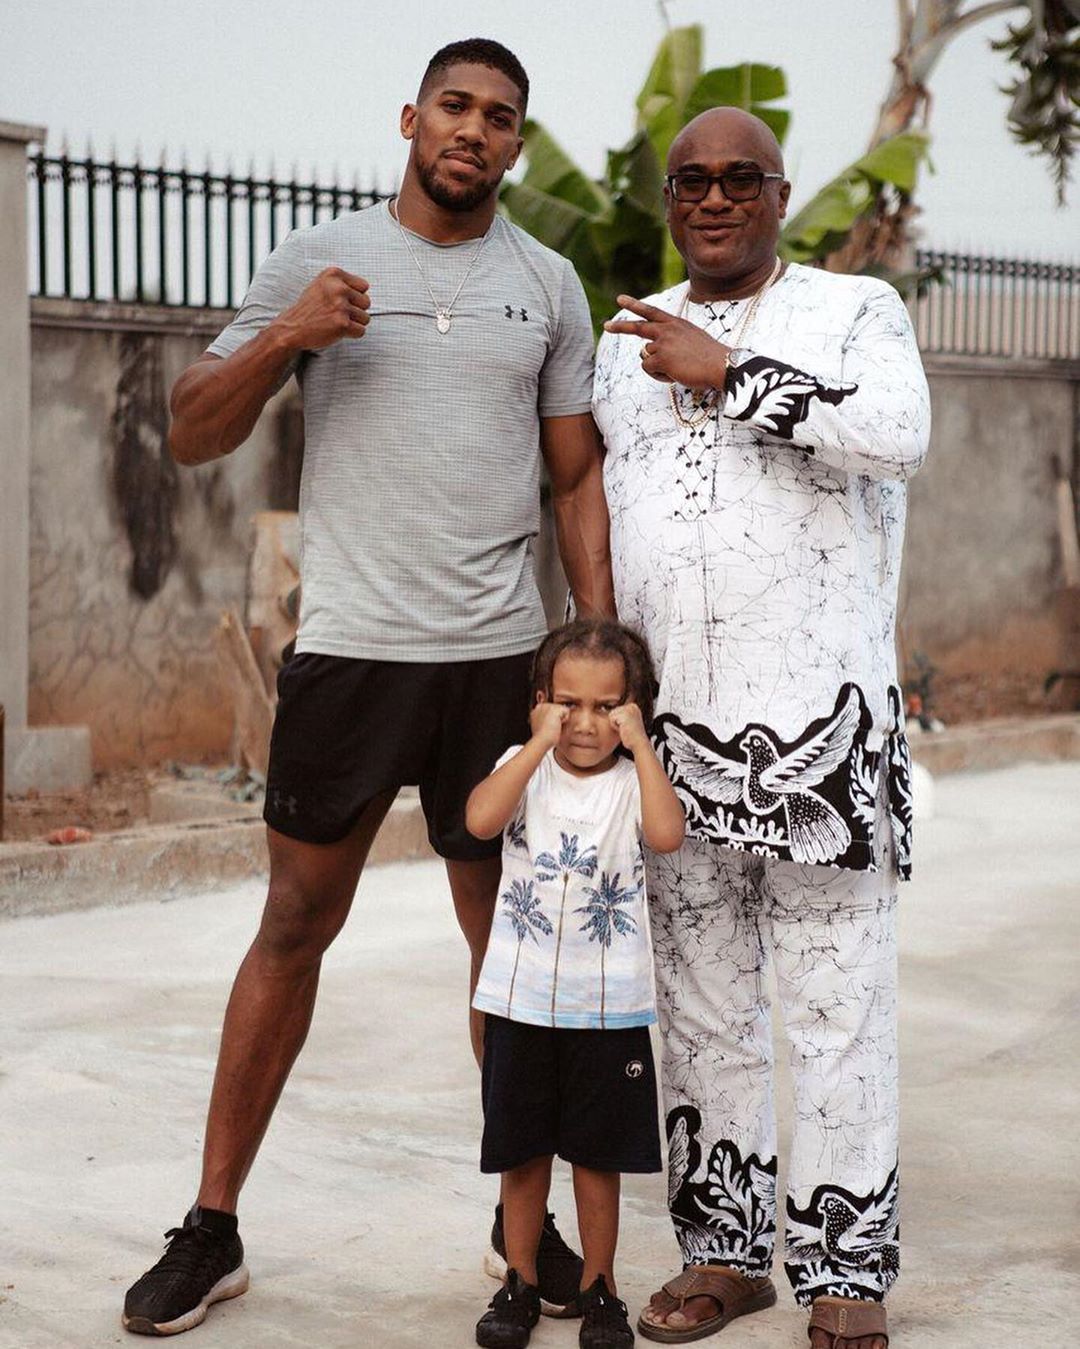 Anthony Joshua shares beautiful 3 generation photo with his father and son